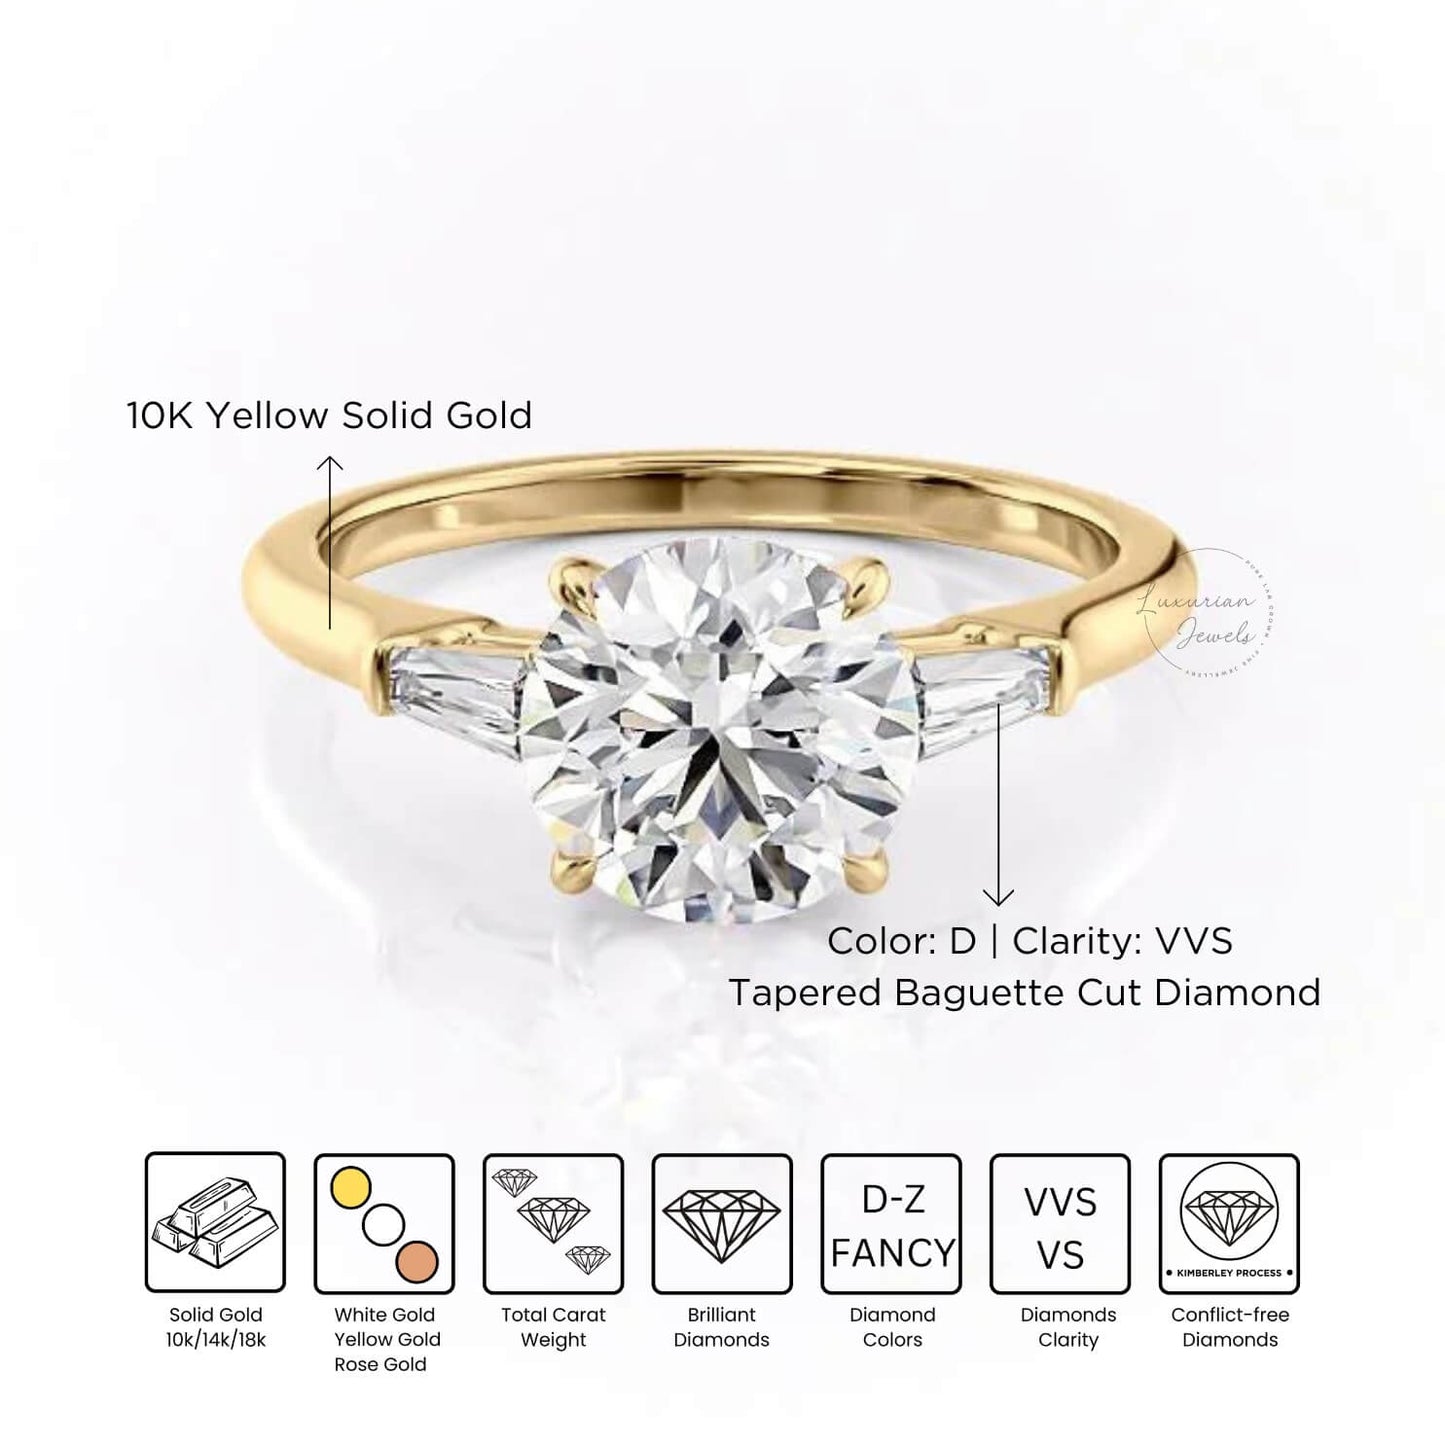 Round and Baguette Diamond Wedding Ring in 14k Gold